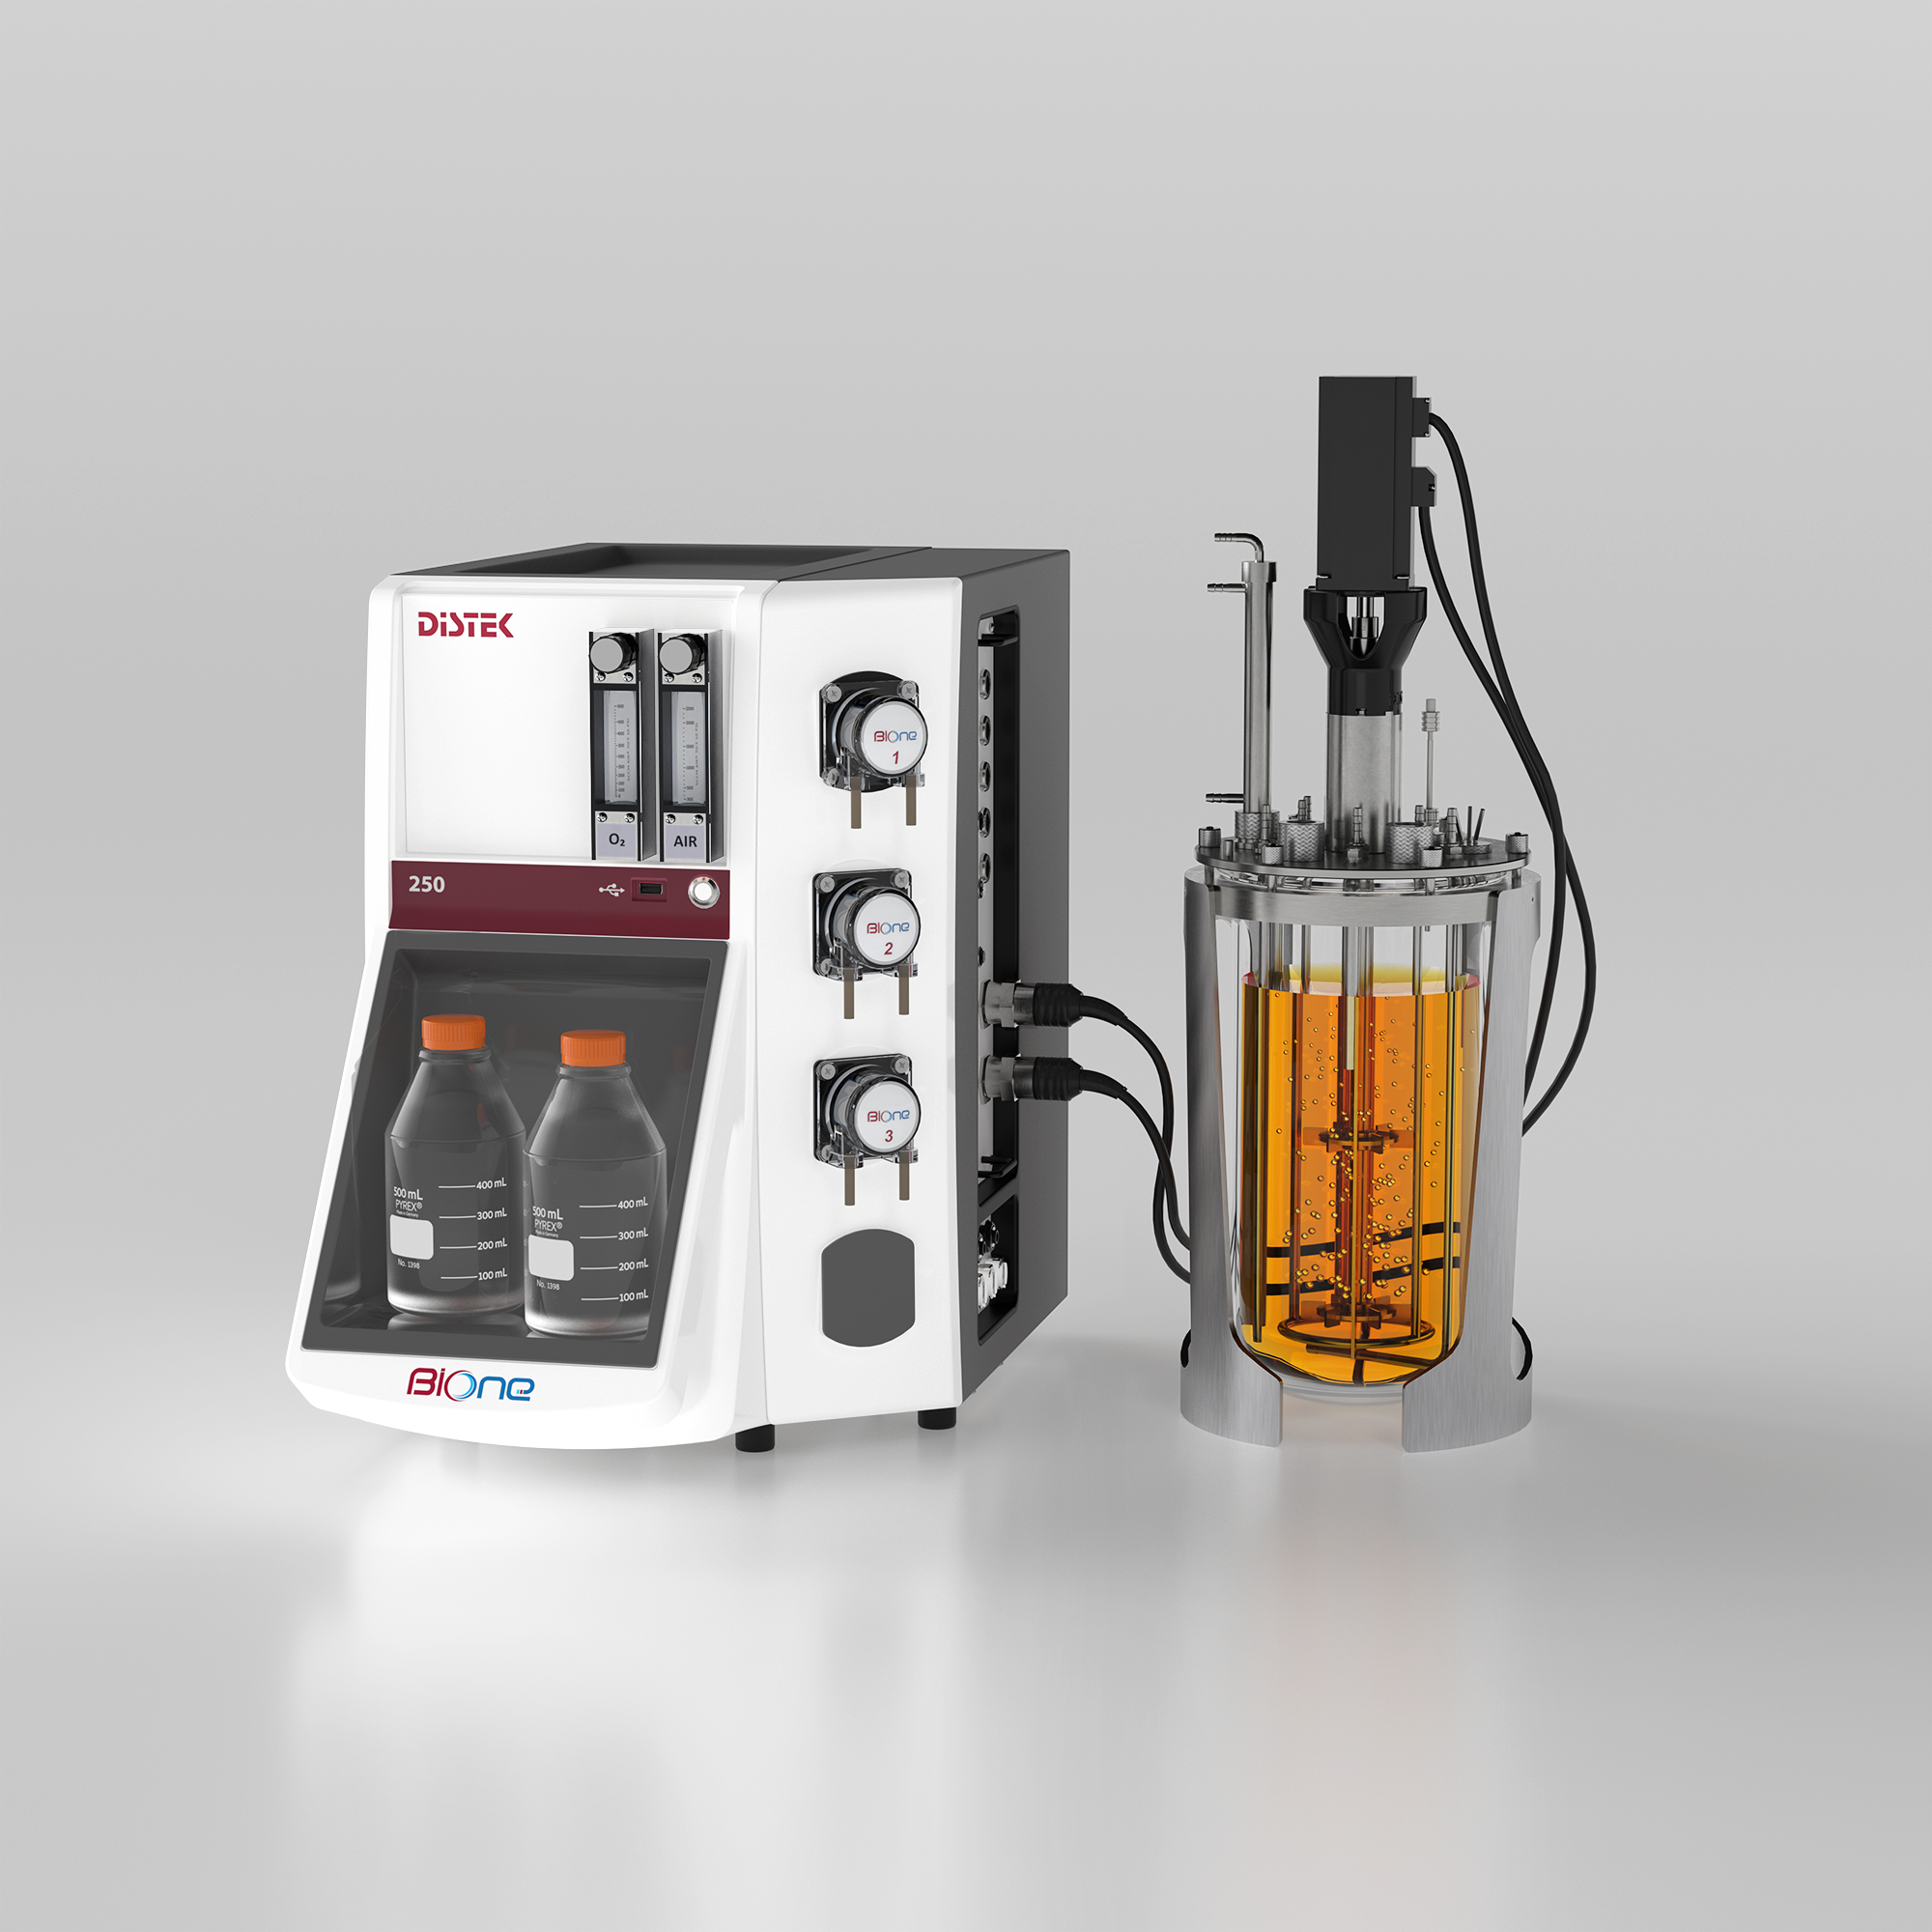 Distek BIOne 250 Bioprocess Control Station for Microbial Applications